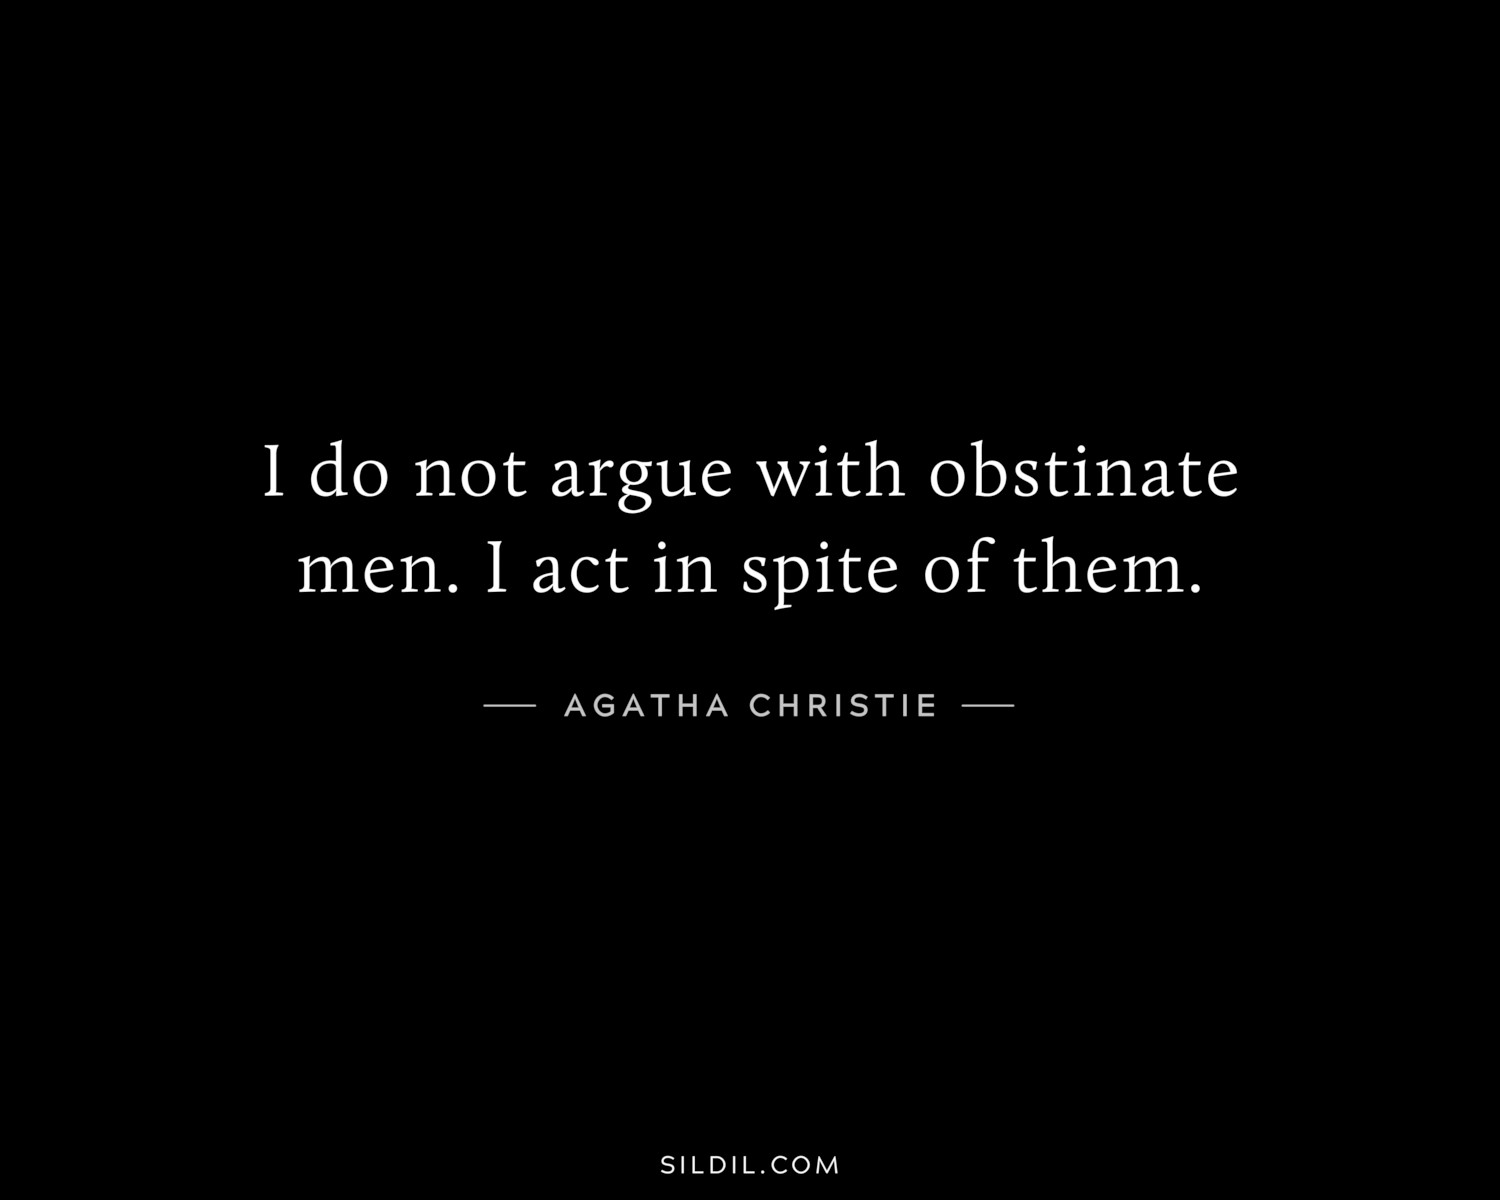 I do not argue with obstinate men. I act in spite of them.